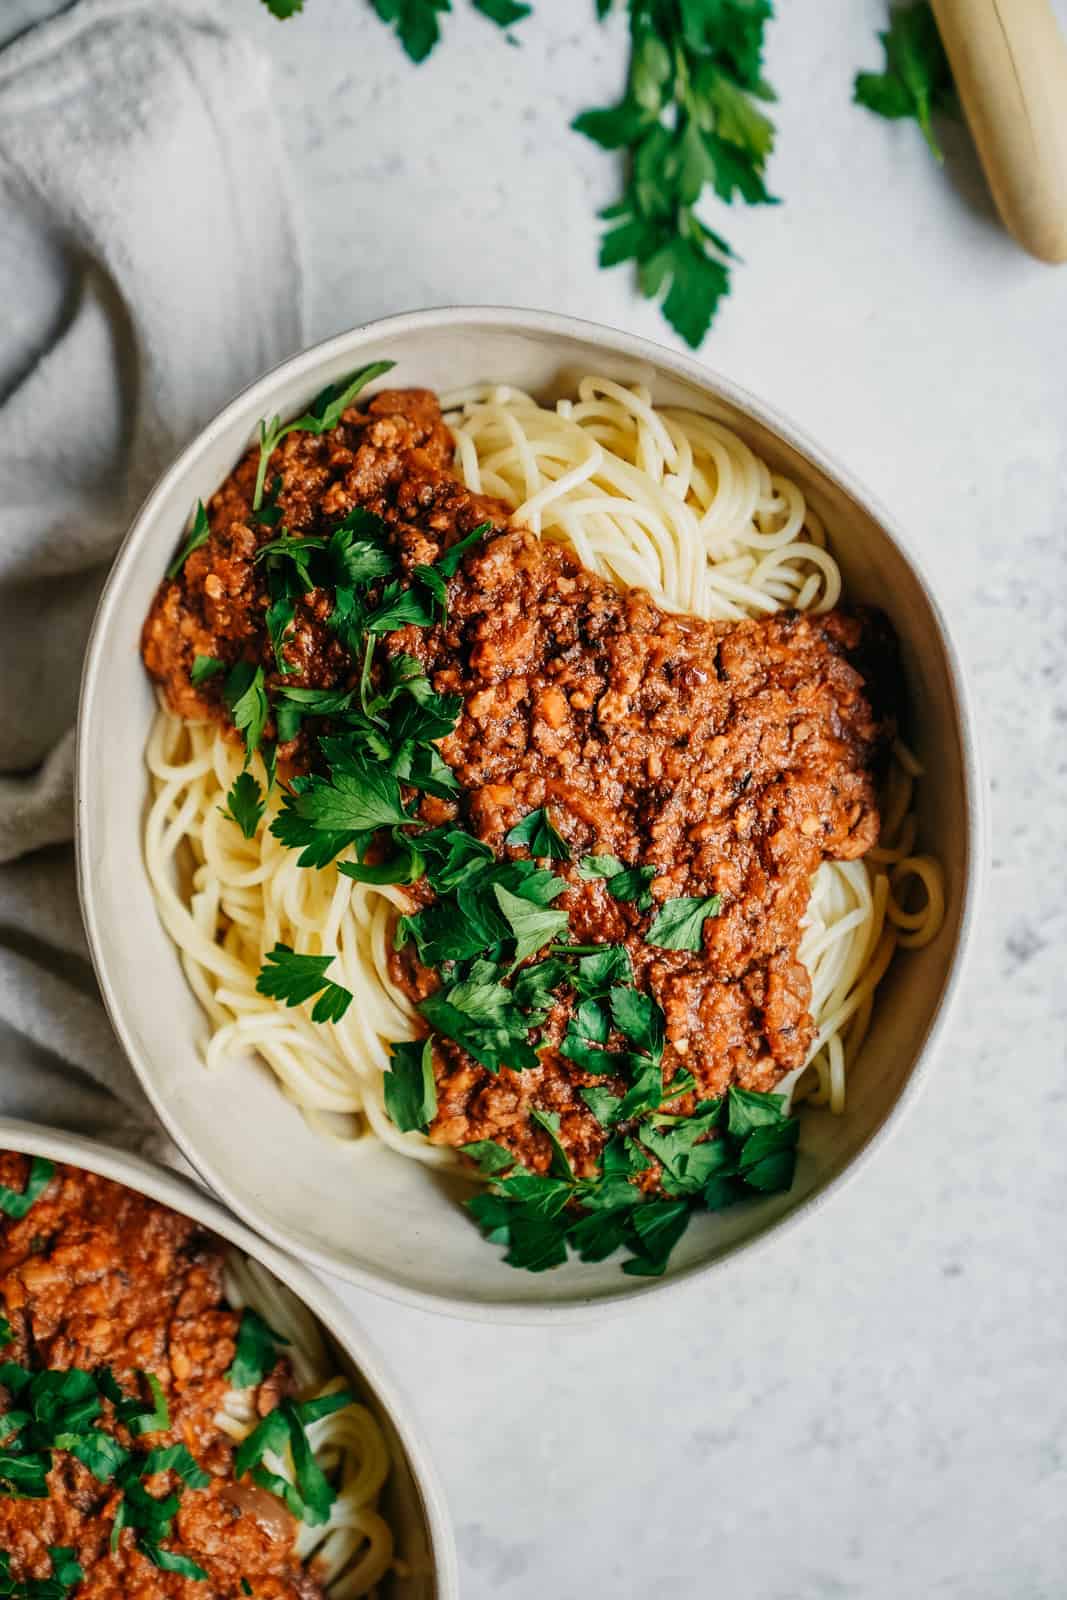 An amazing vegan meatsauce that almost tastes just like the real thing. Easy to make and will be one of your go-to vegan meals.